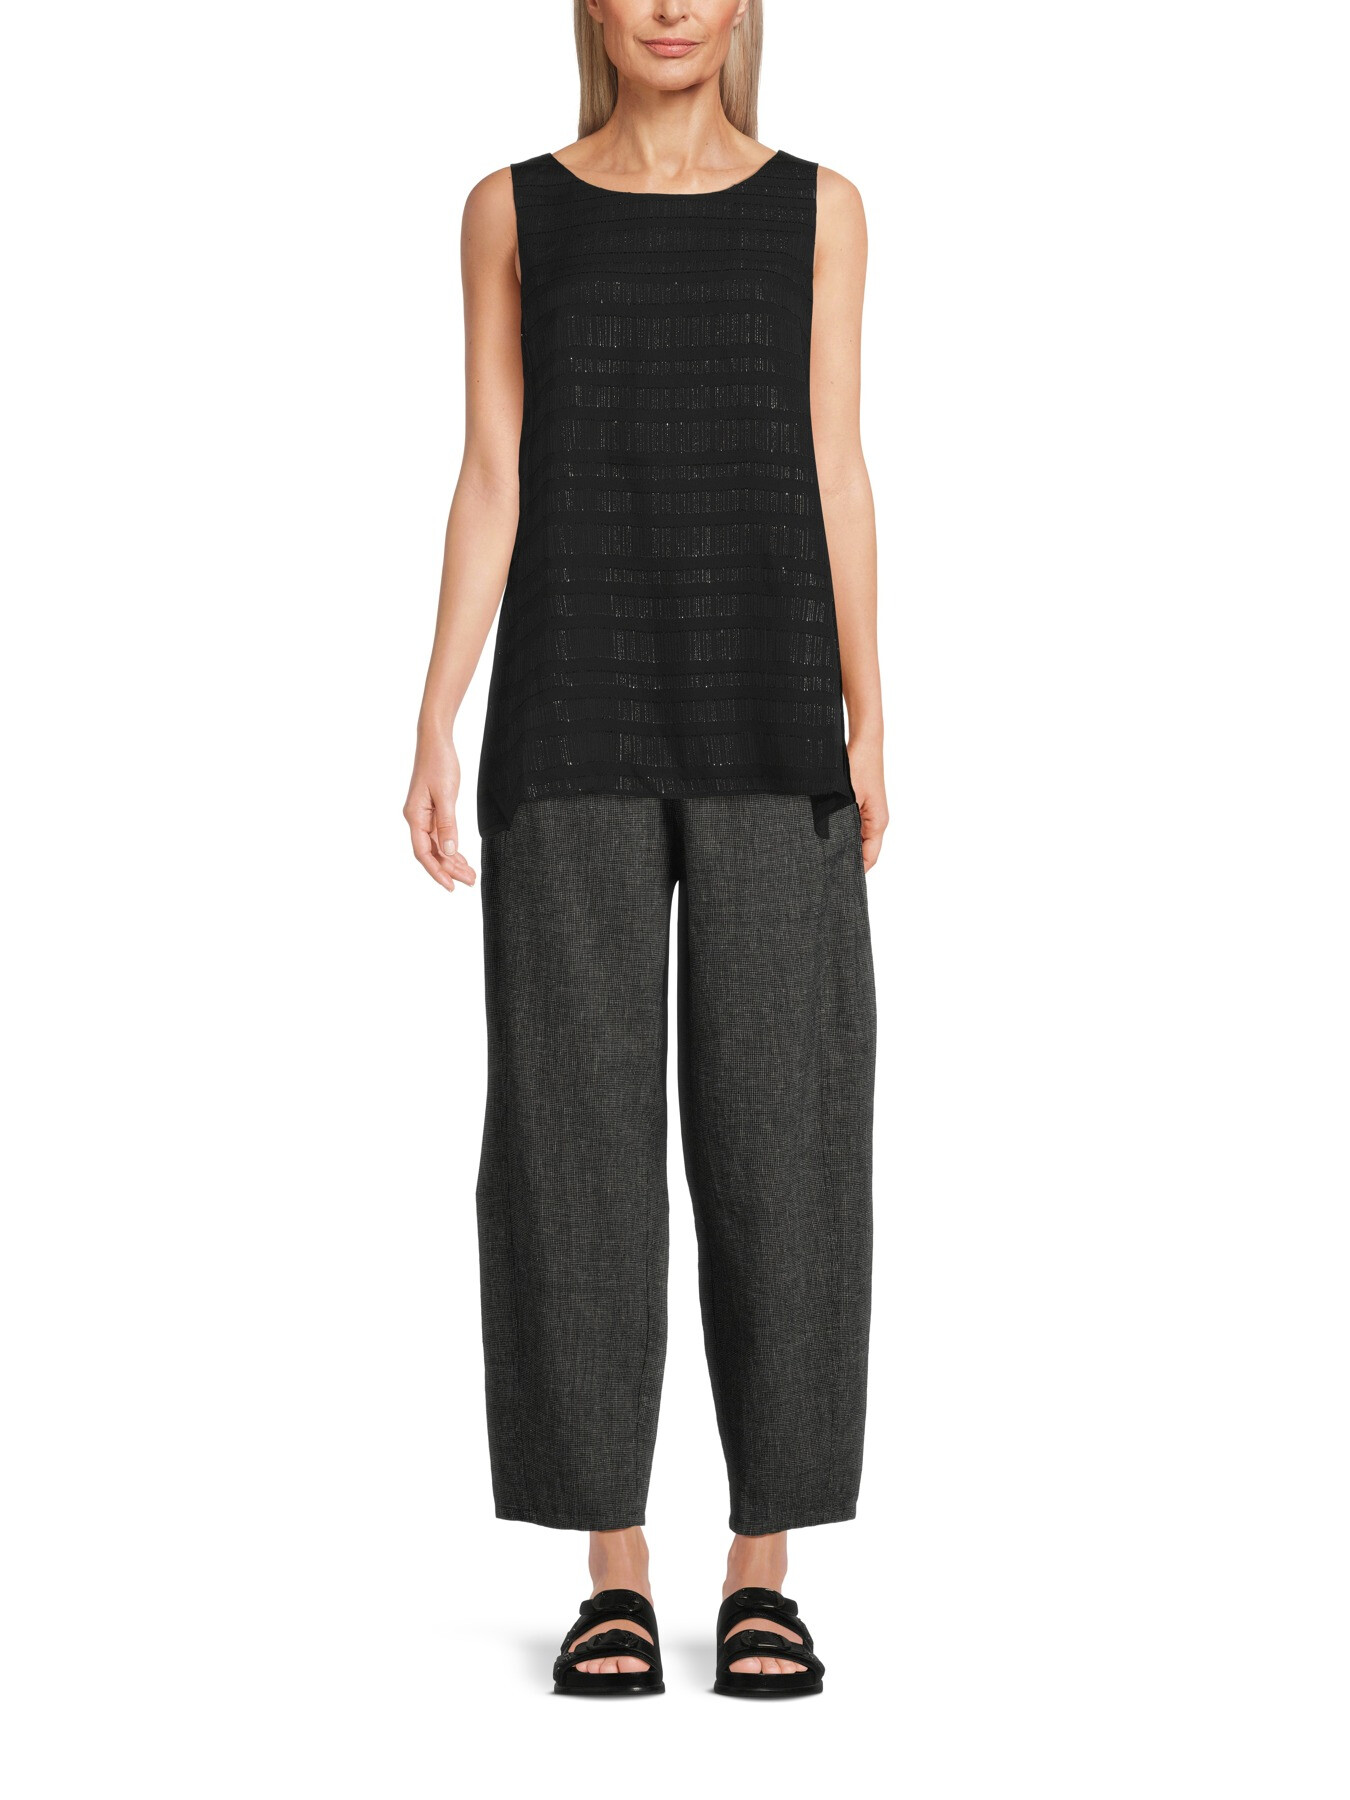 Eileen Fisher Lantern ANeckle Pant | Cropped | Fenwick